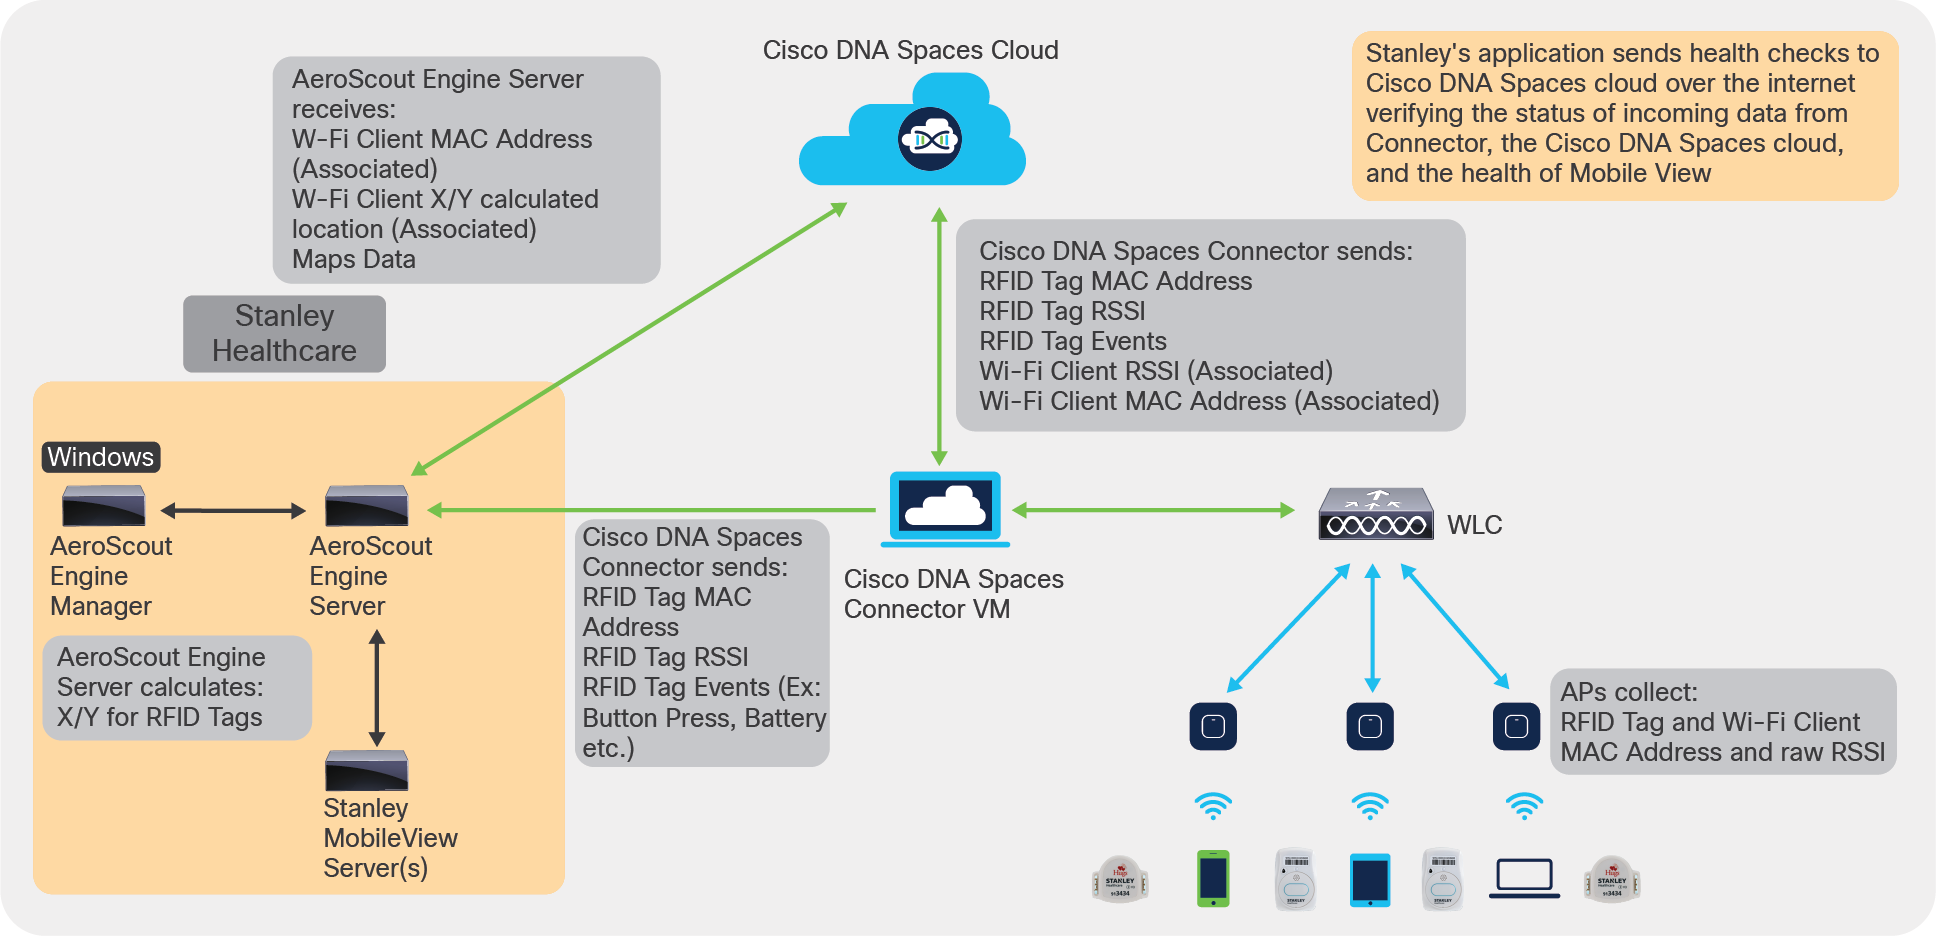 Cisco DNA Spaces and Stanley Healthcare architecture